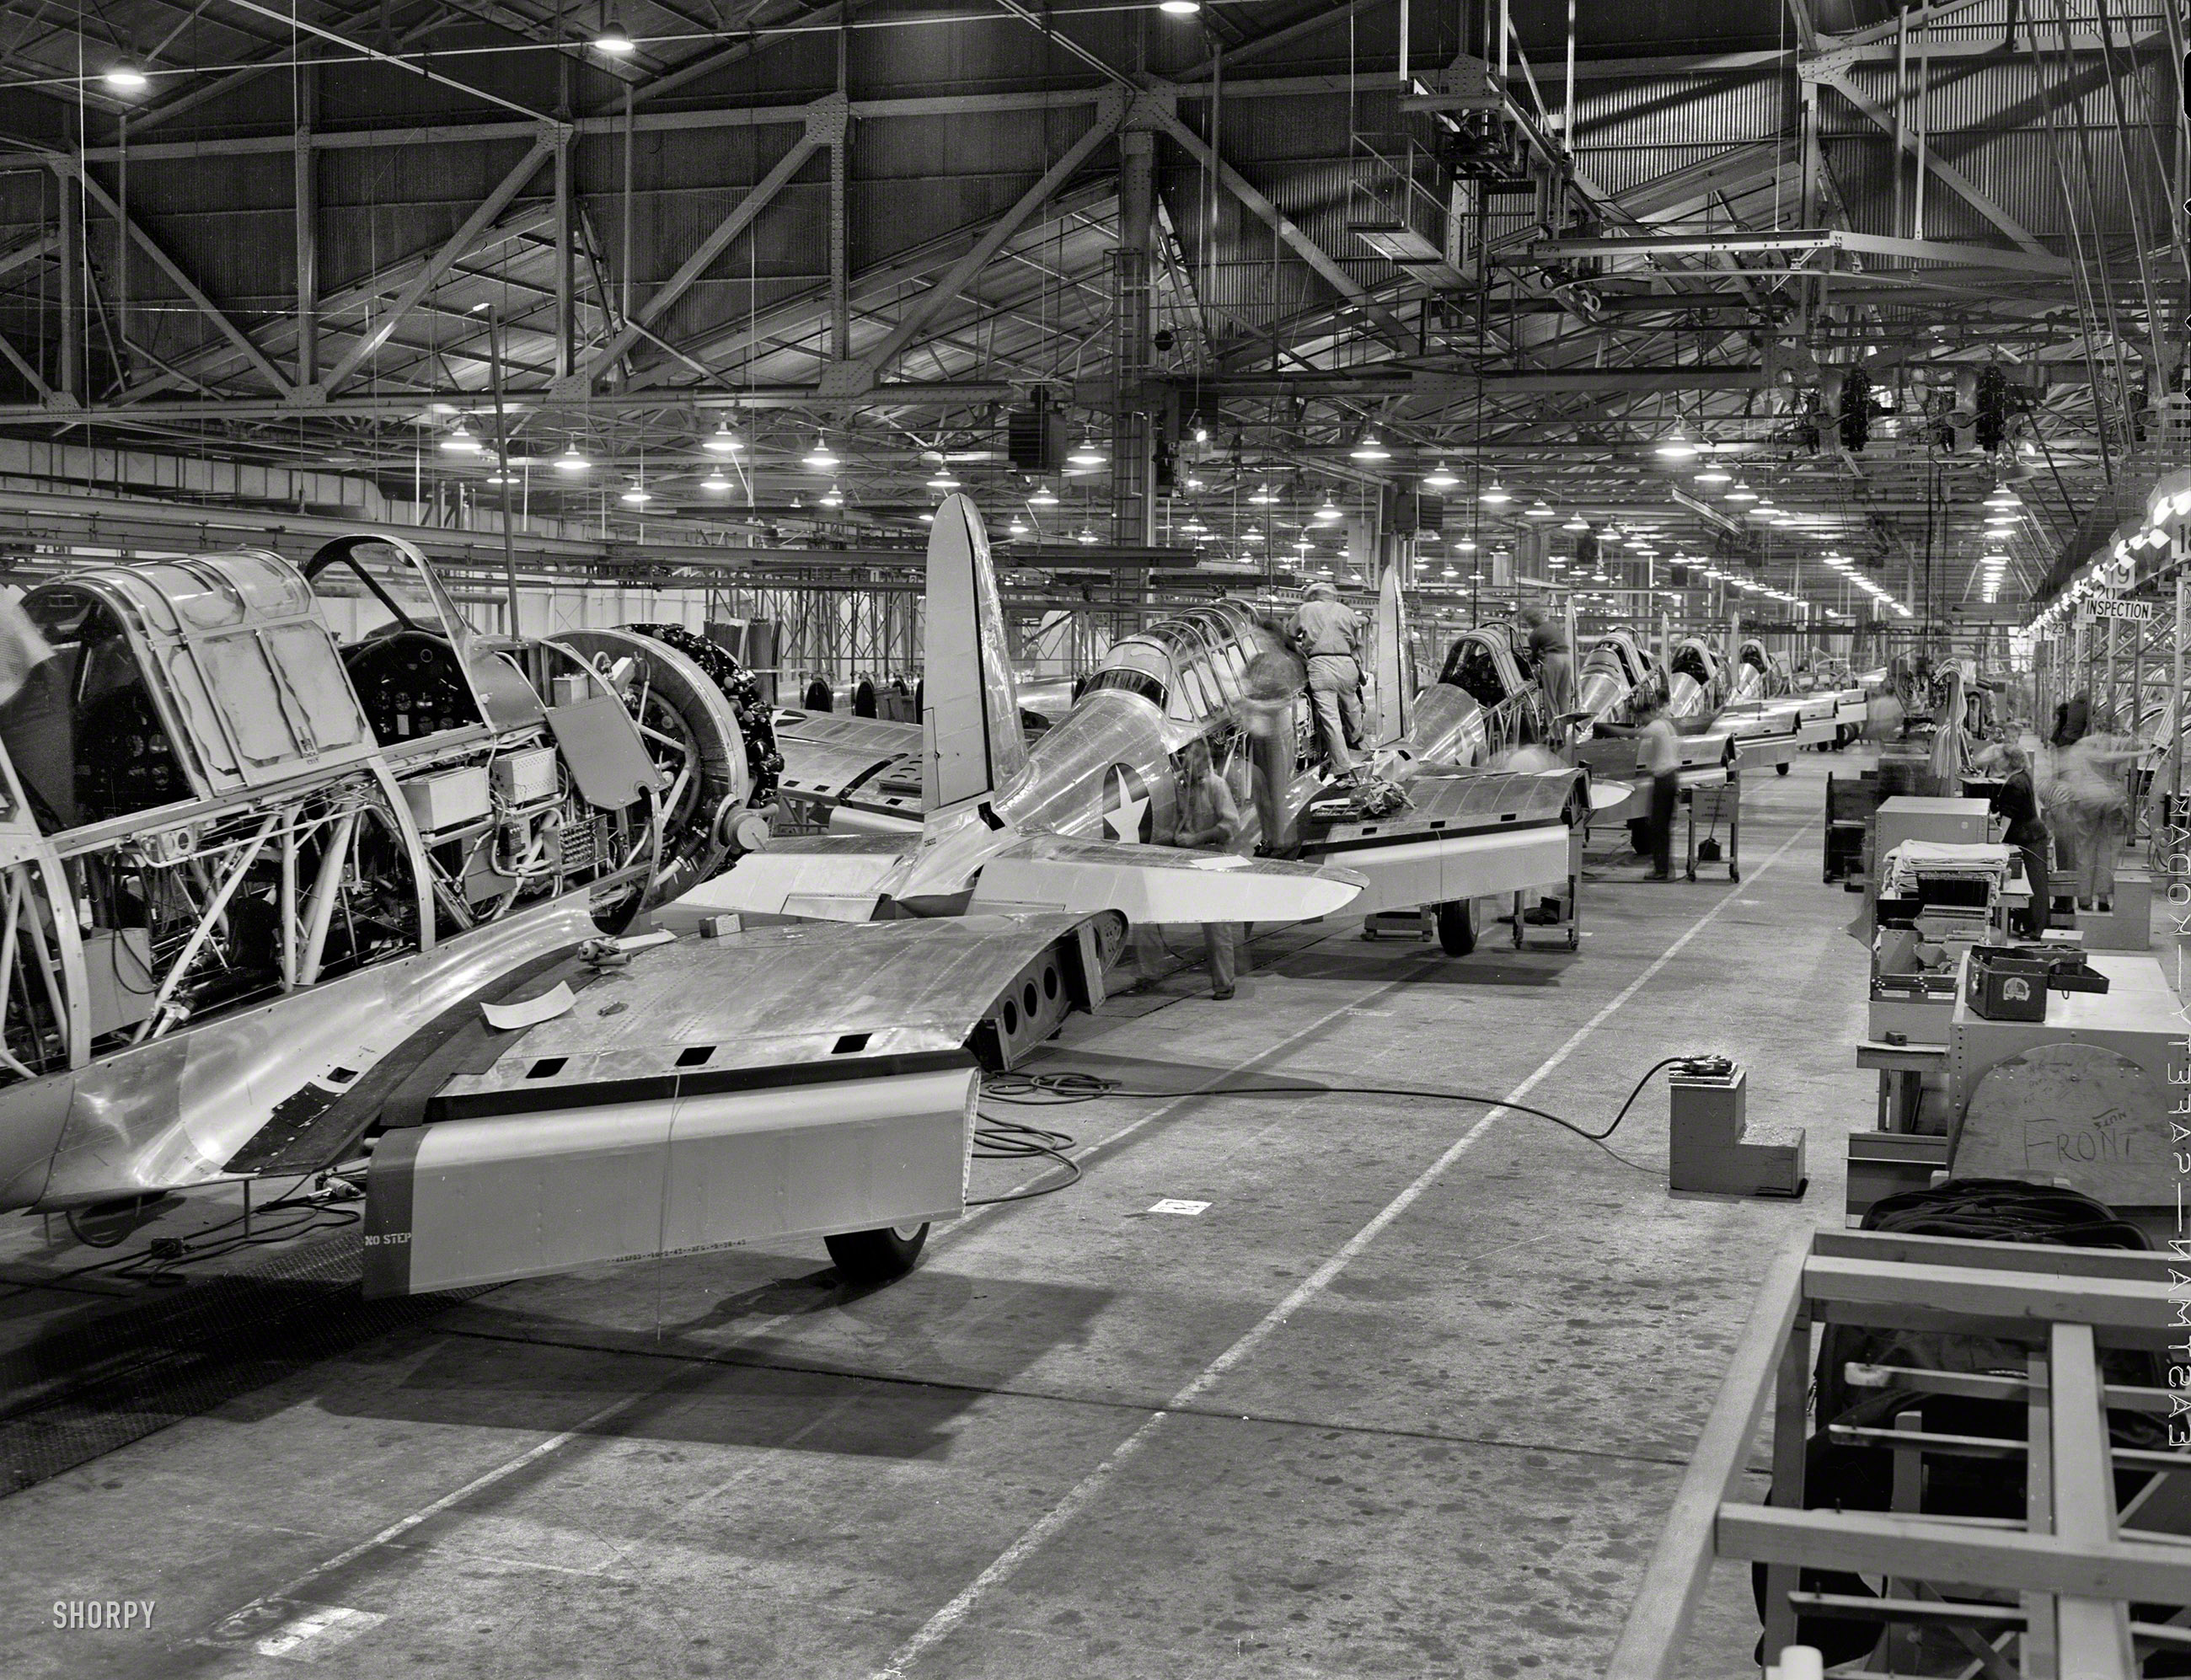 1942. "Final assembly at Vultee's Downey, California, plant of the BT-13A 'Valiant' basic trainer -- a fast, sturdy ship powered by a Pratt & Whitney Wasp engine." Photo by Alfred Palmer for the Office of War Information. View full size.